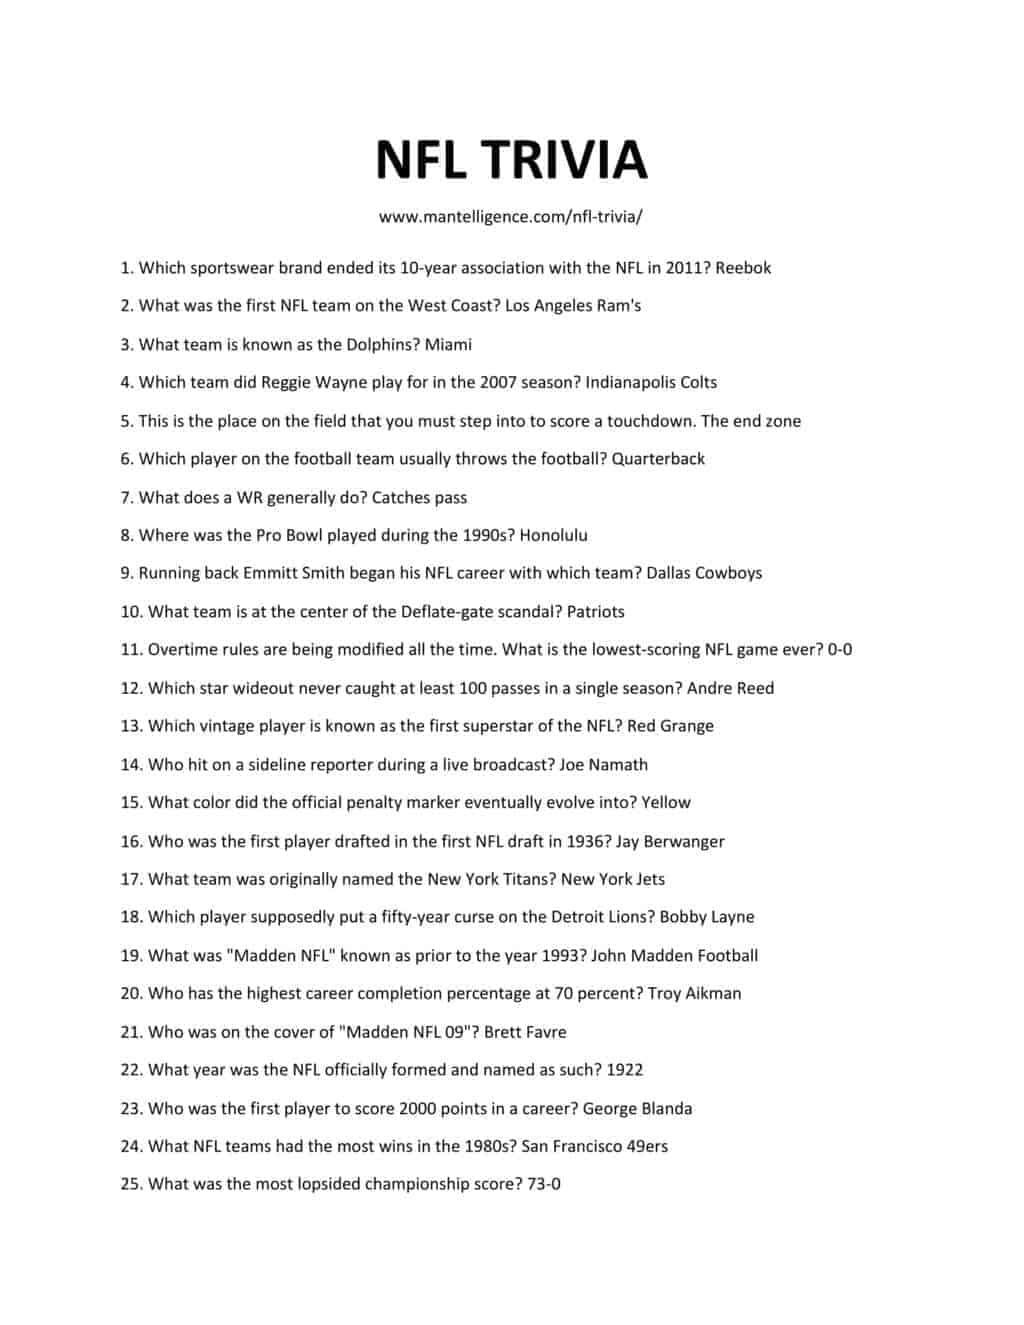 30 Best NFL Trivia Questions And Answers The Only List You ll Need